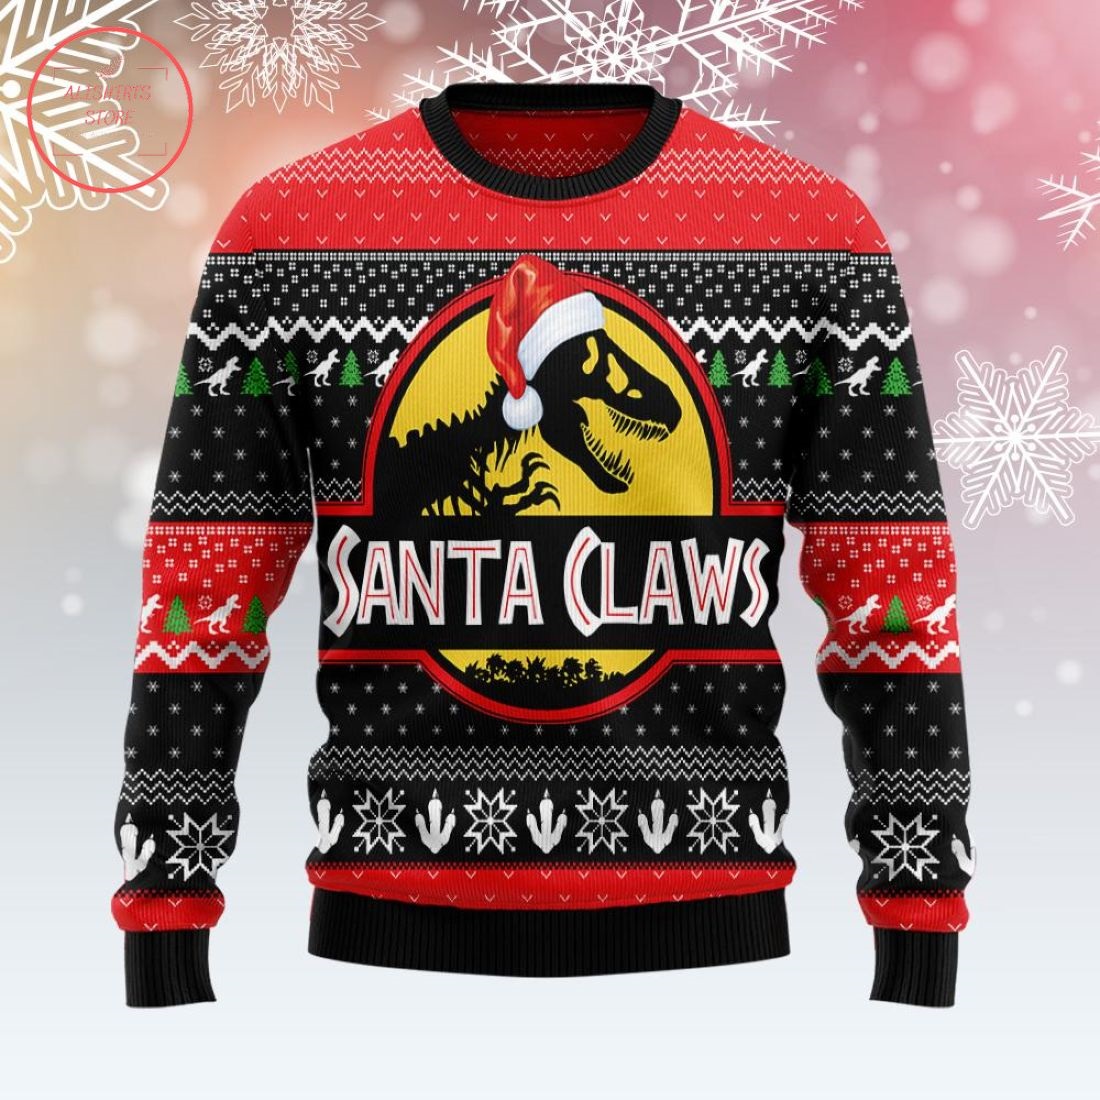 Santa Claws Trex Ugly Christmas Sweater